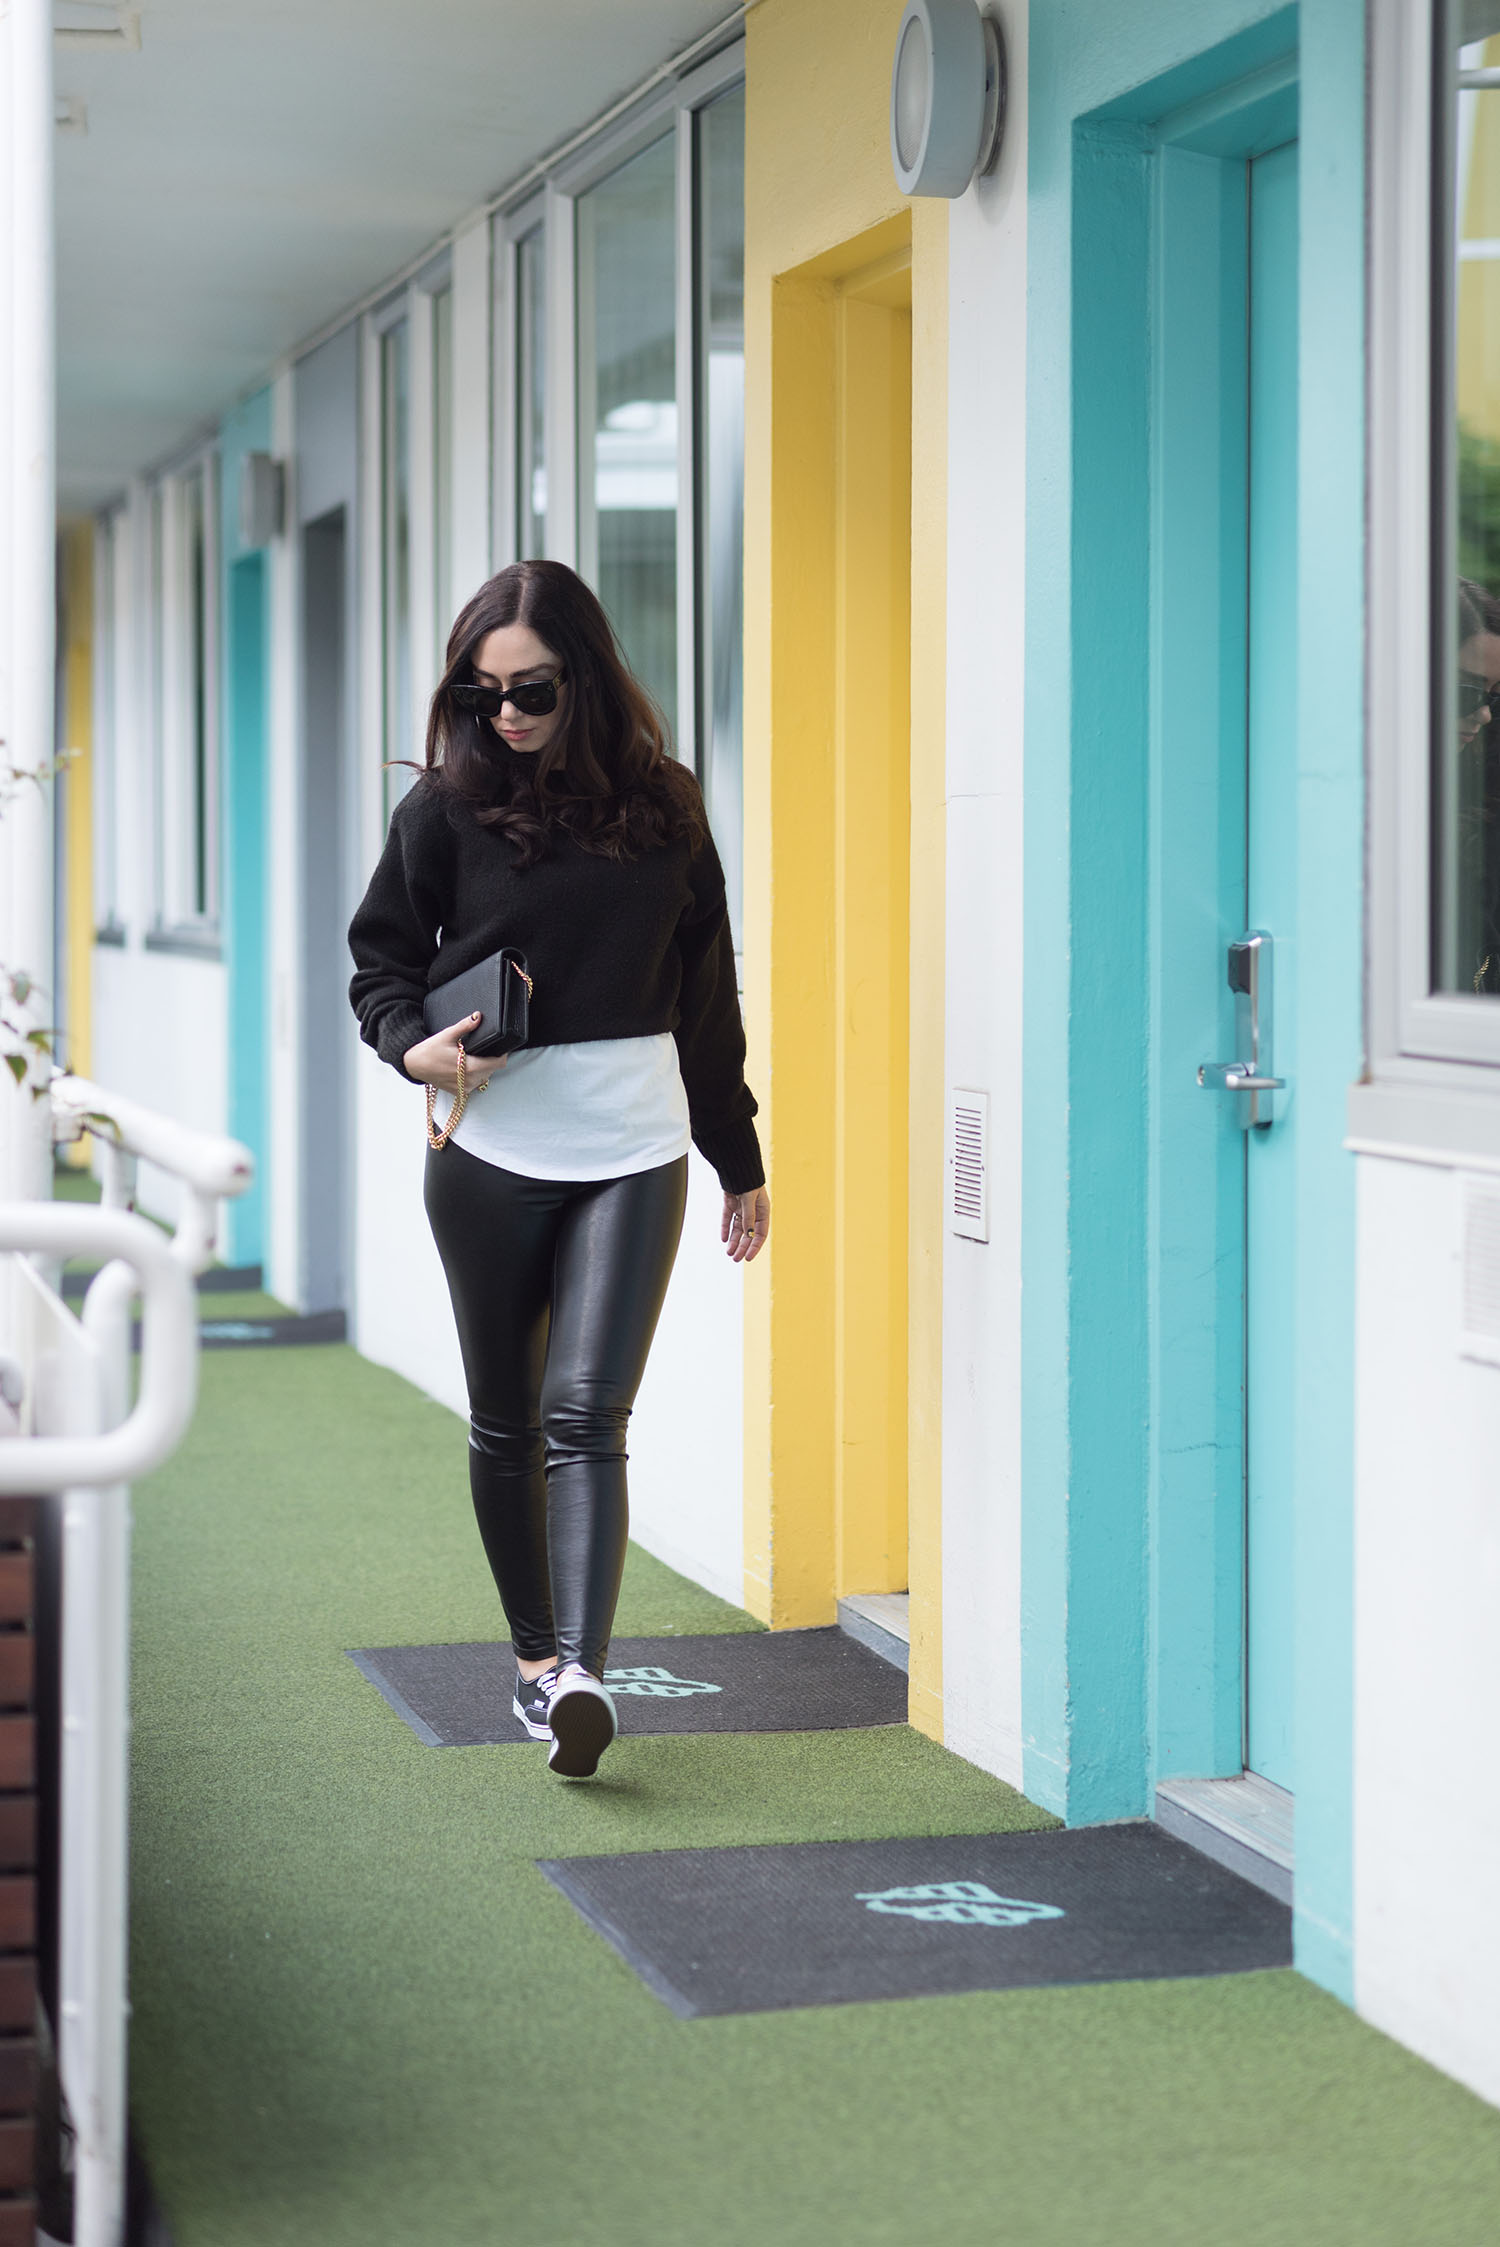 Fashion blogger Cee Fardoe of Coco & Vera walks the courtyard of The Burrard Hotel wearing an & Other Stories black sweater